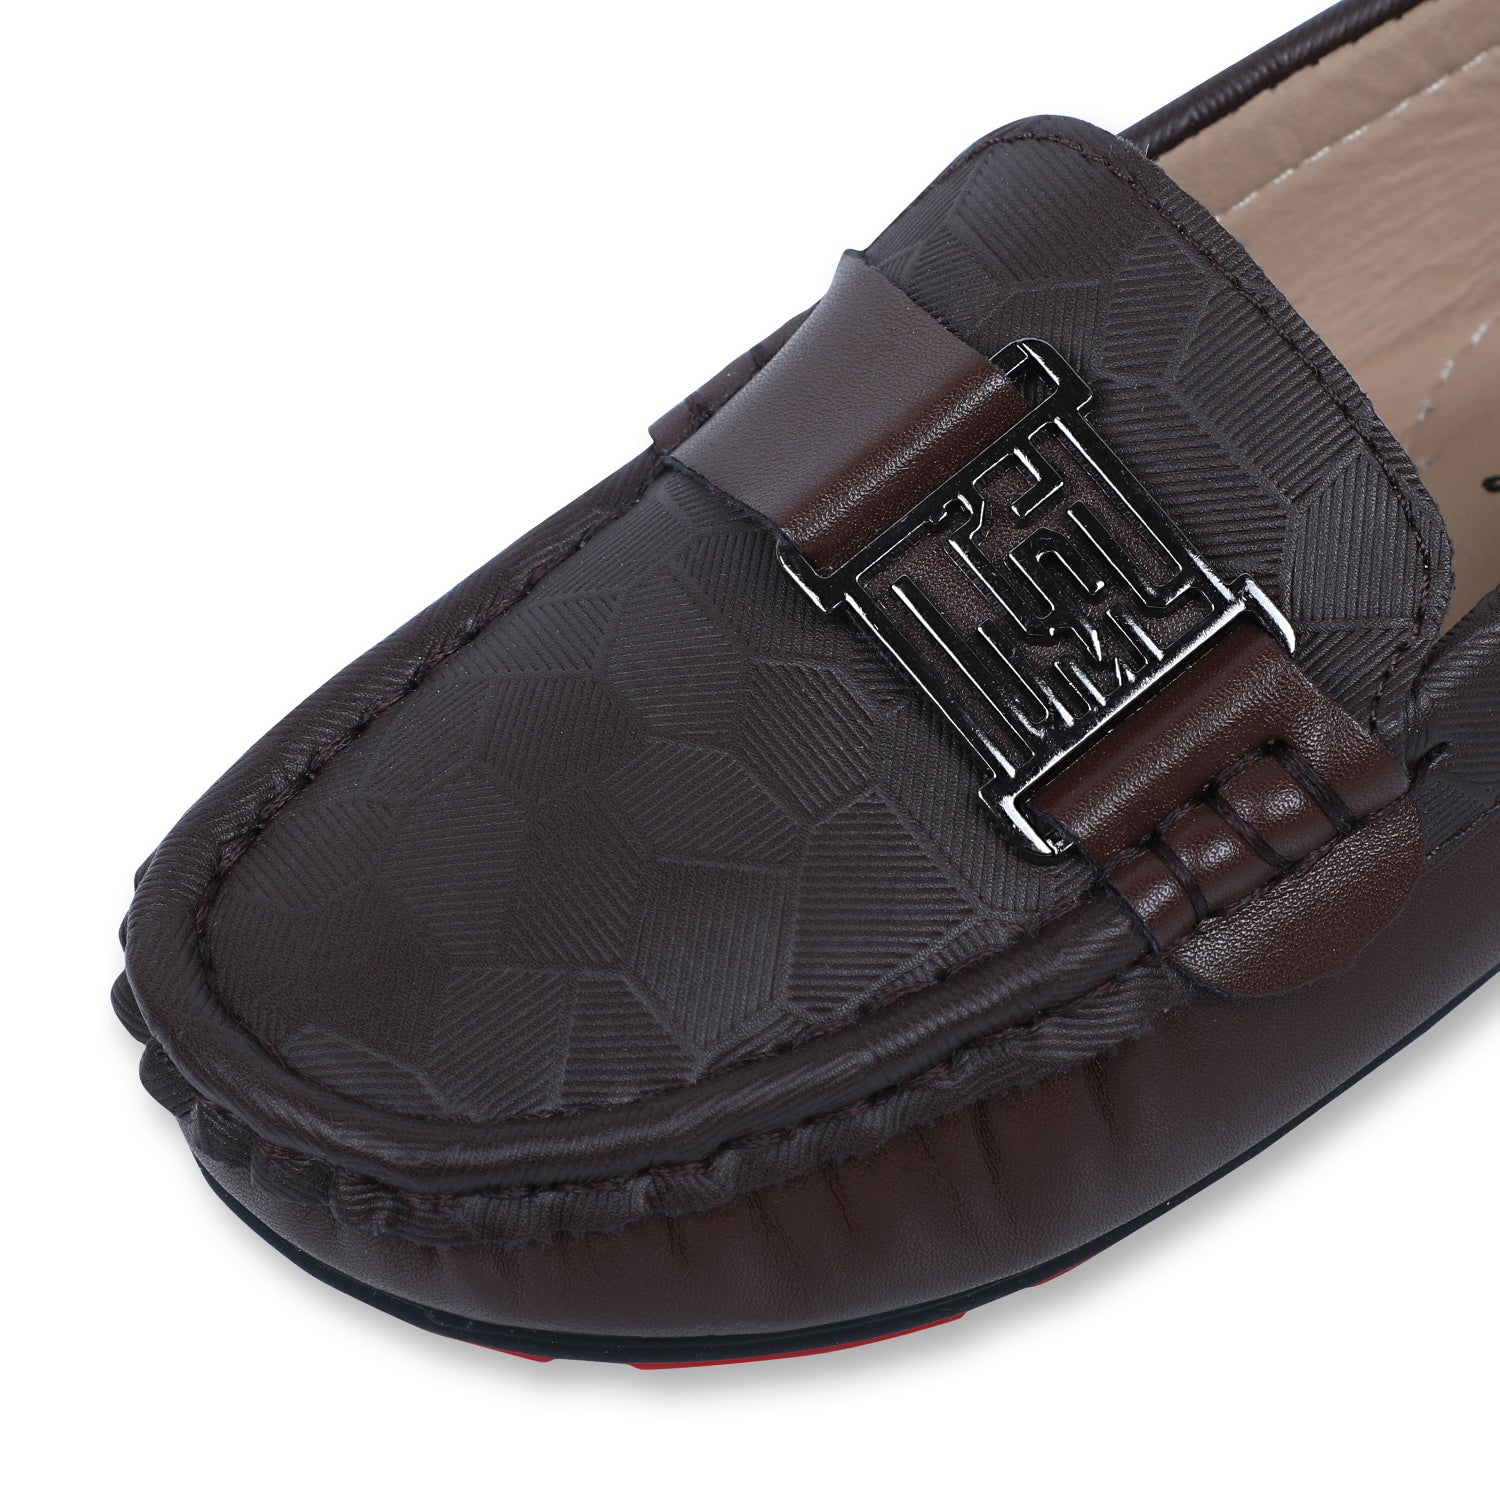 Baby Moo x Bash Kids Textured Leatherite Loafer Shoes - Brown